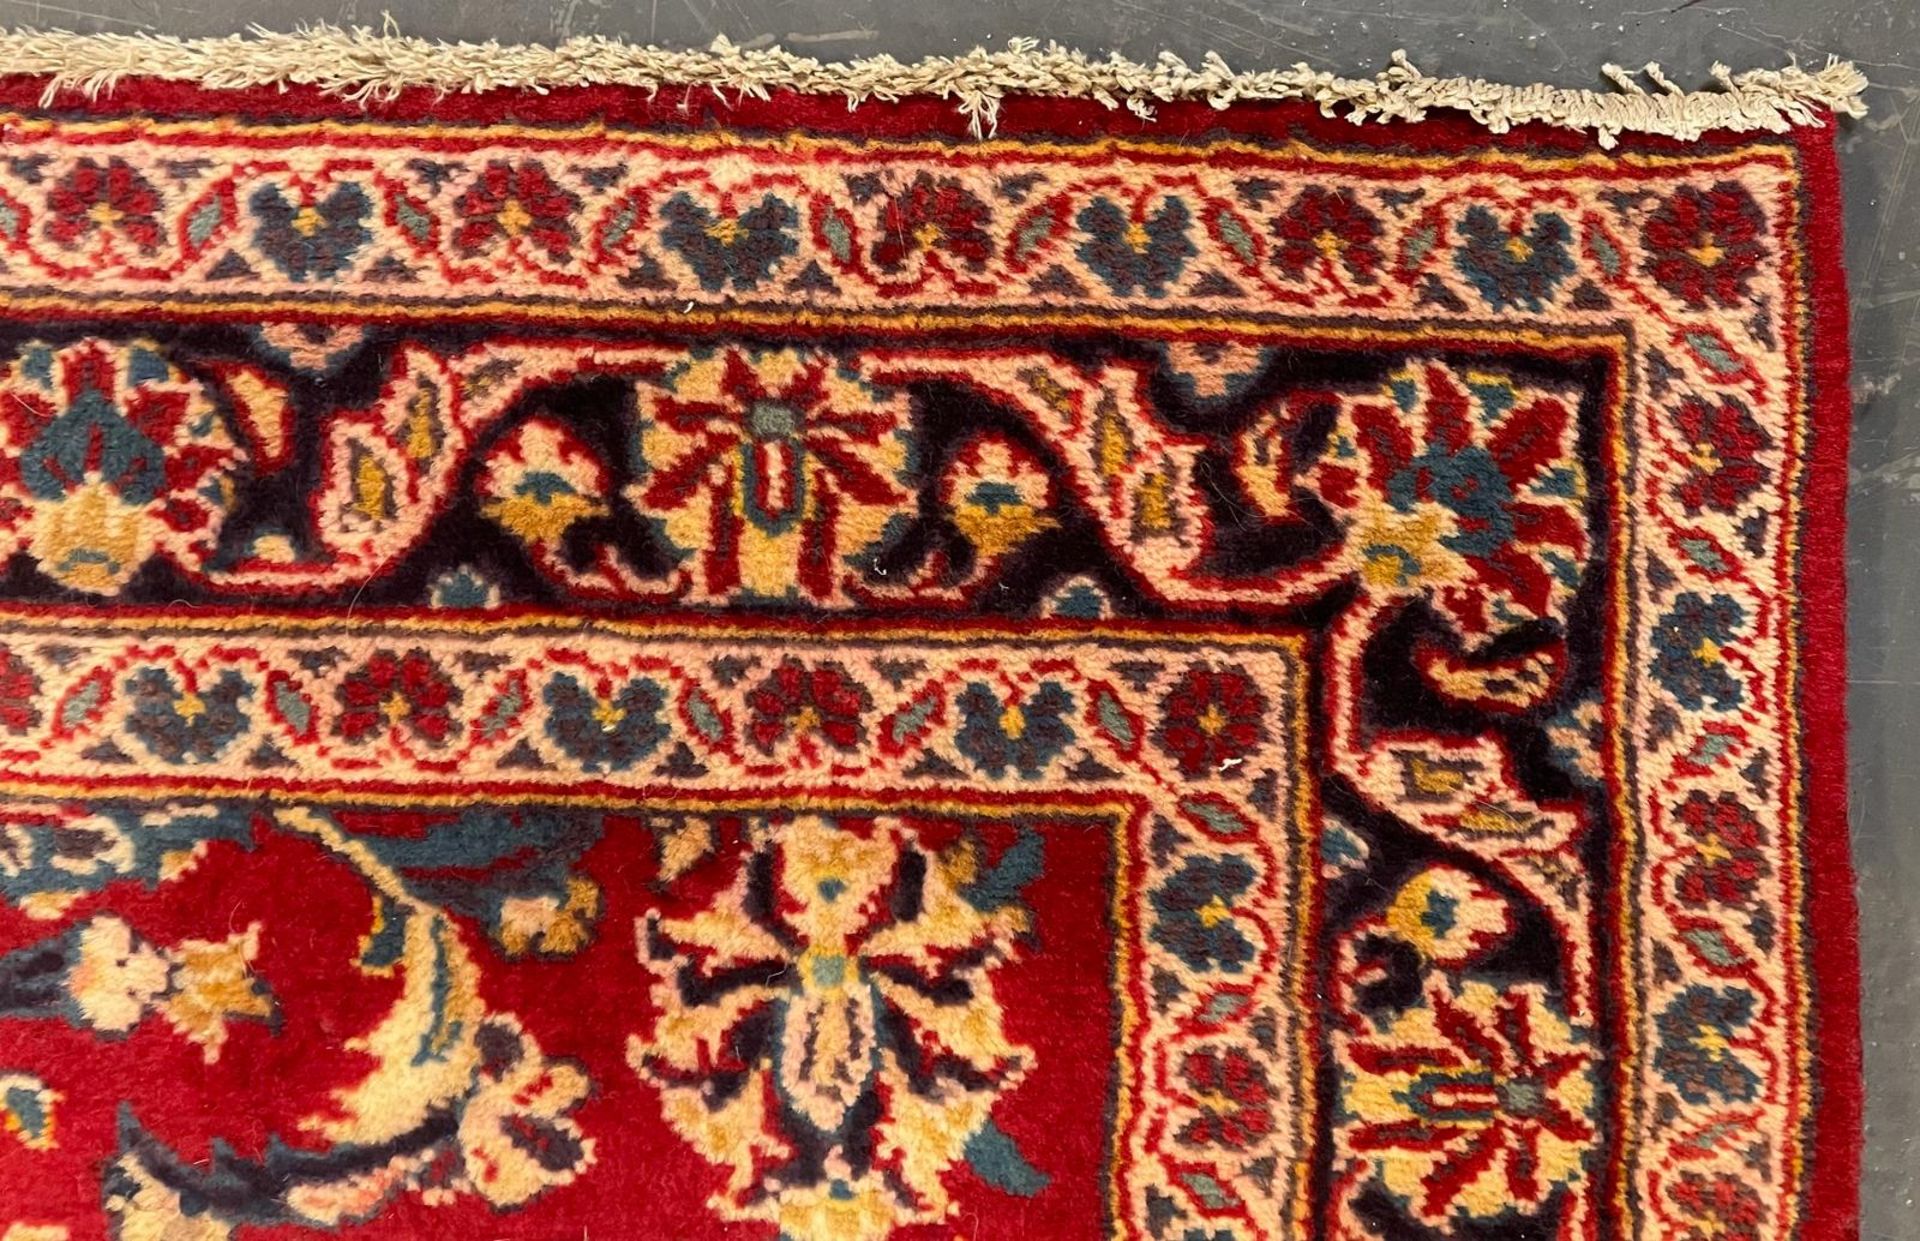 LARGE EARLY 20TH CENTURY CENTRAL PERSIAN KASHAN RUNNER RUG - Image 2 of 5